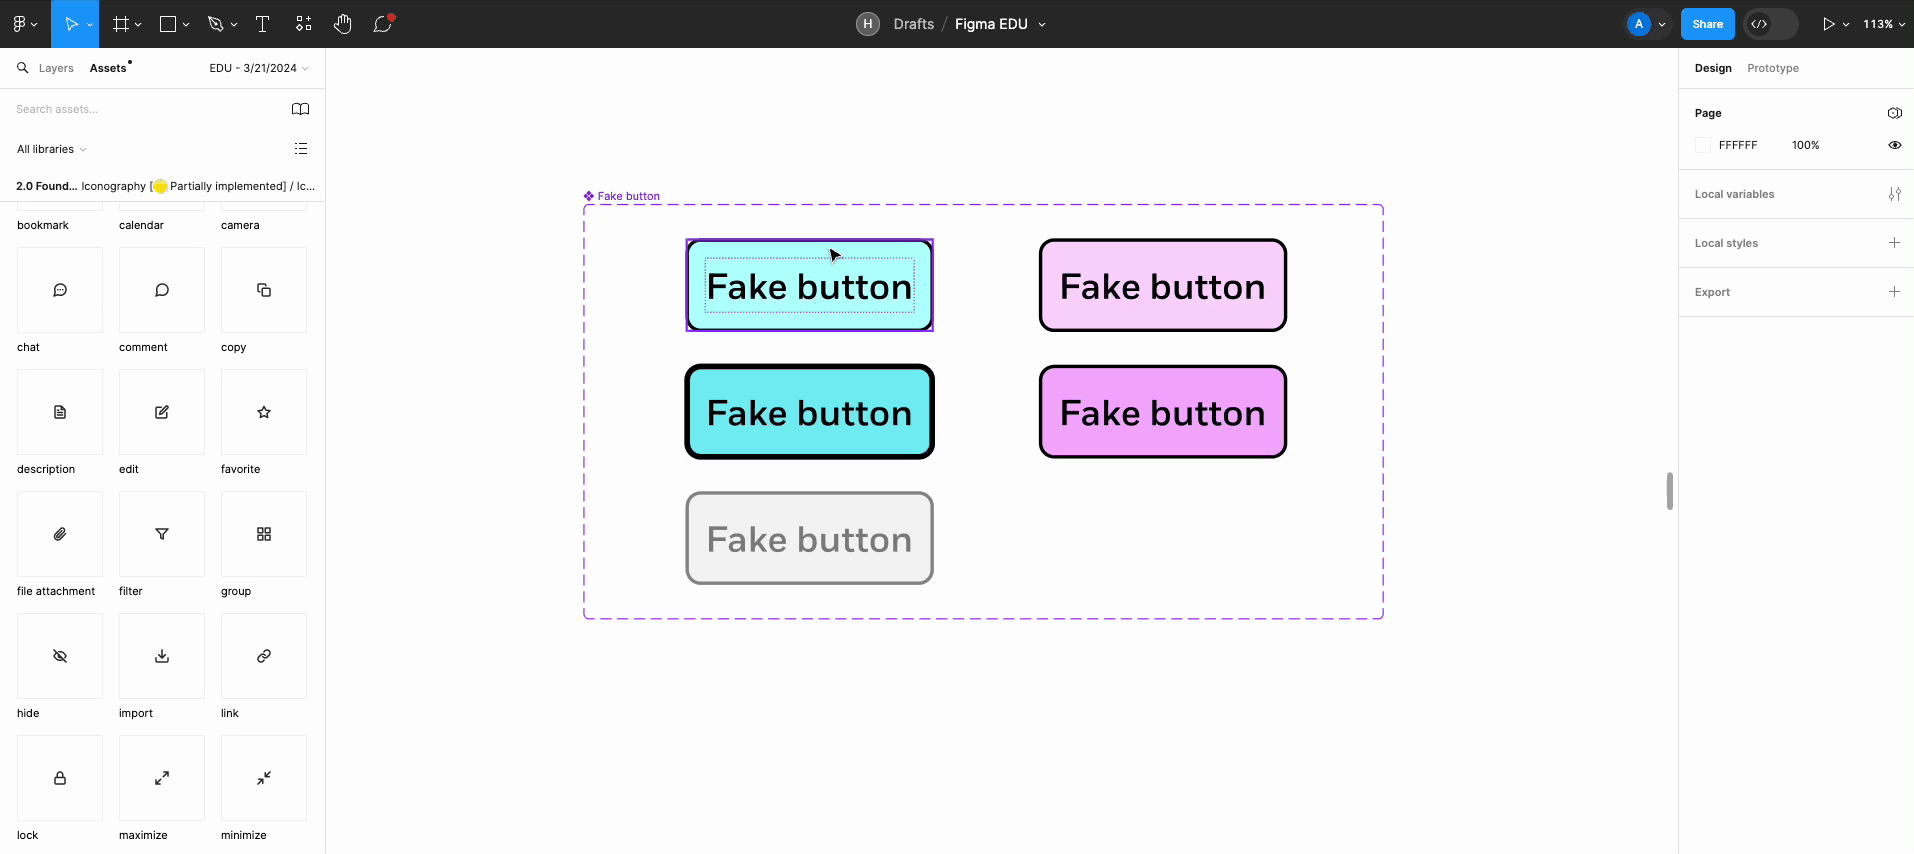 Shows selecting a variant in a component set in Figma will allow you to click on the ‘Multi-edit variants’ tool in the top-middle toolbar to make updates to all variant’s padding and adding an icon to the left-side